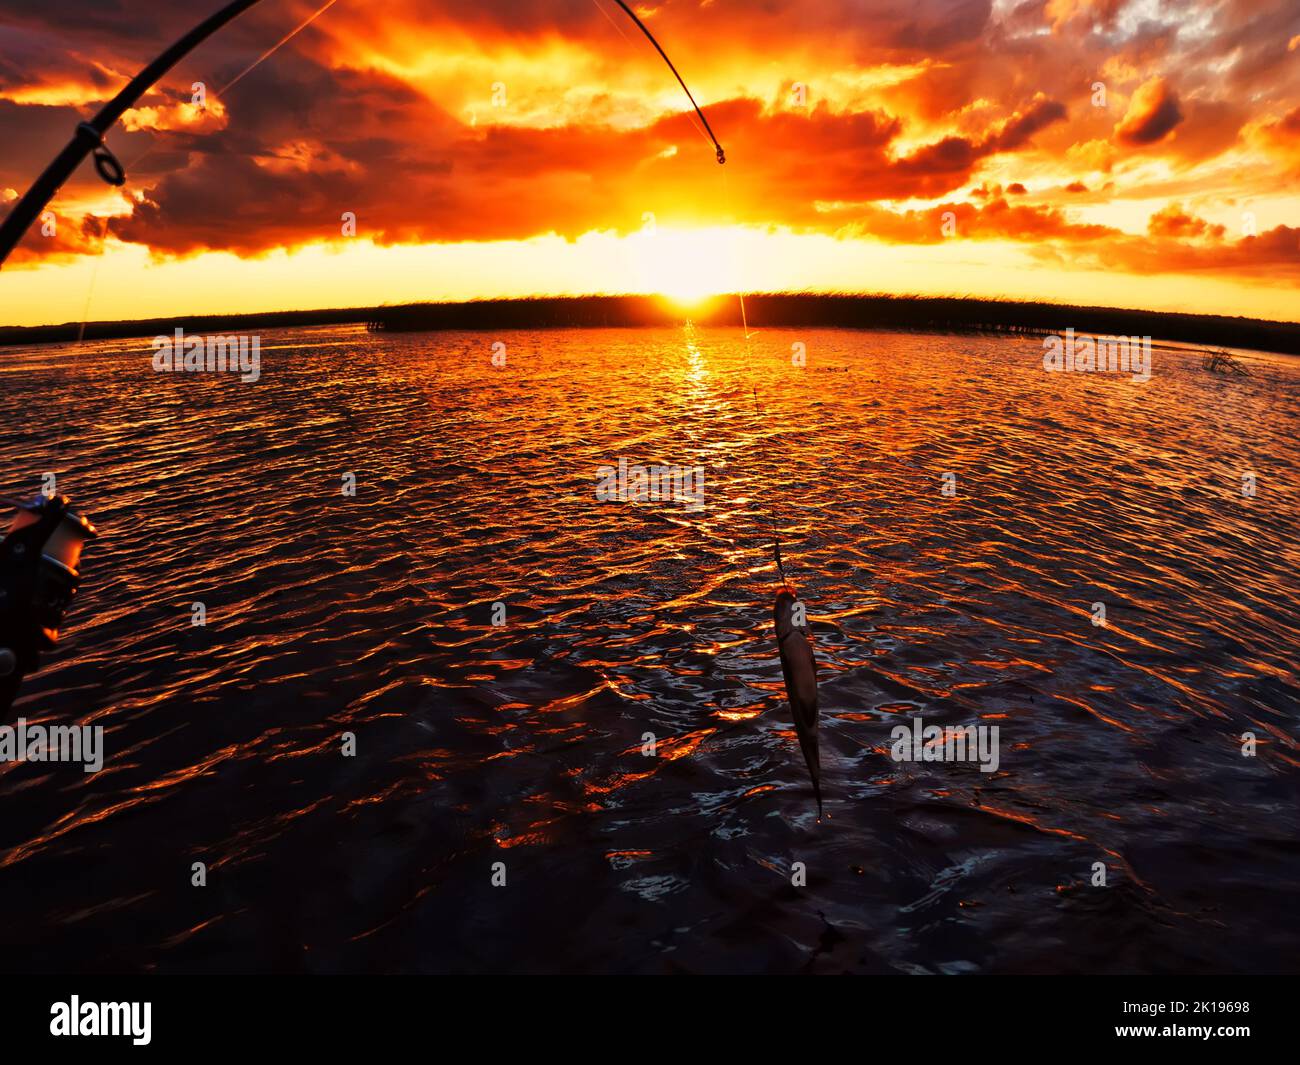 Fishing at sunset. Catching predatory fish on spinning. Sunset colors on the water surface, sunny path from the low sun. Nerfling caught on a spinner. Stock Photo